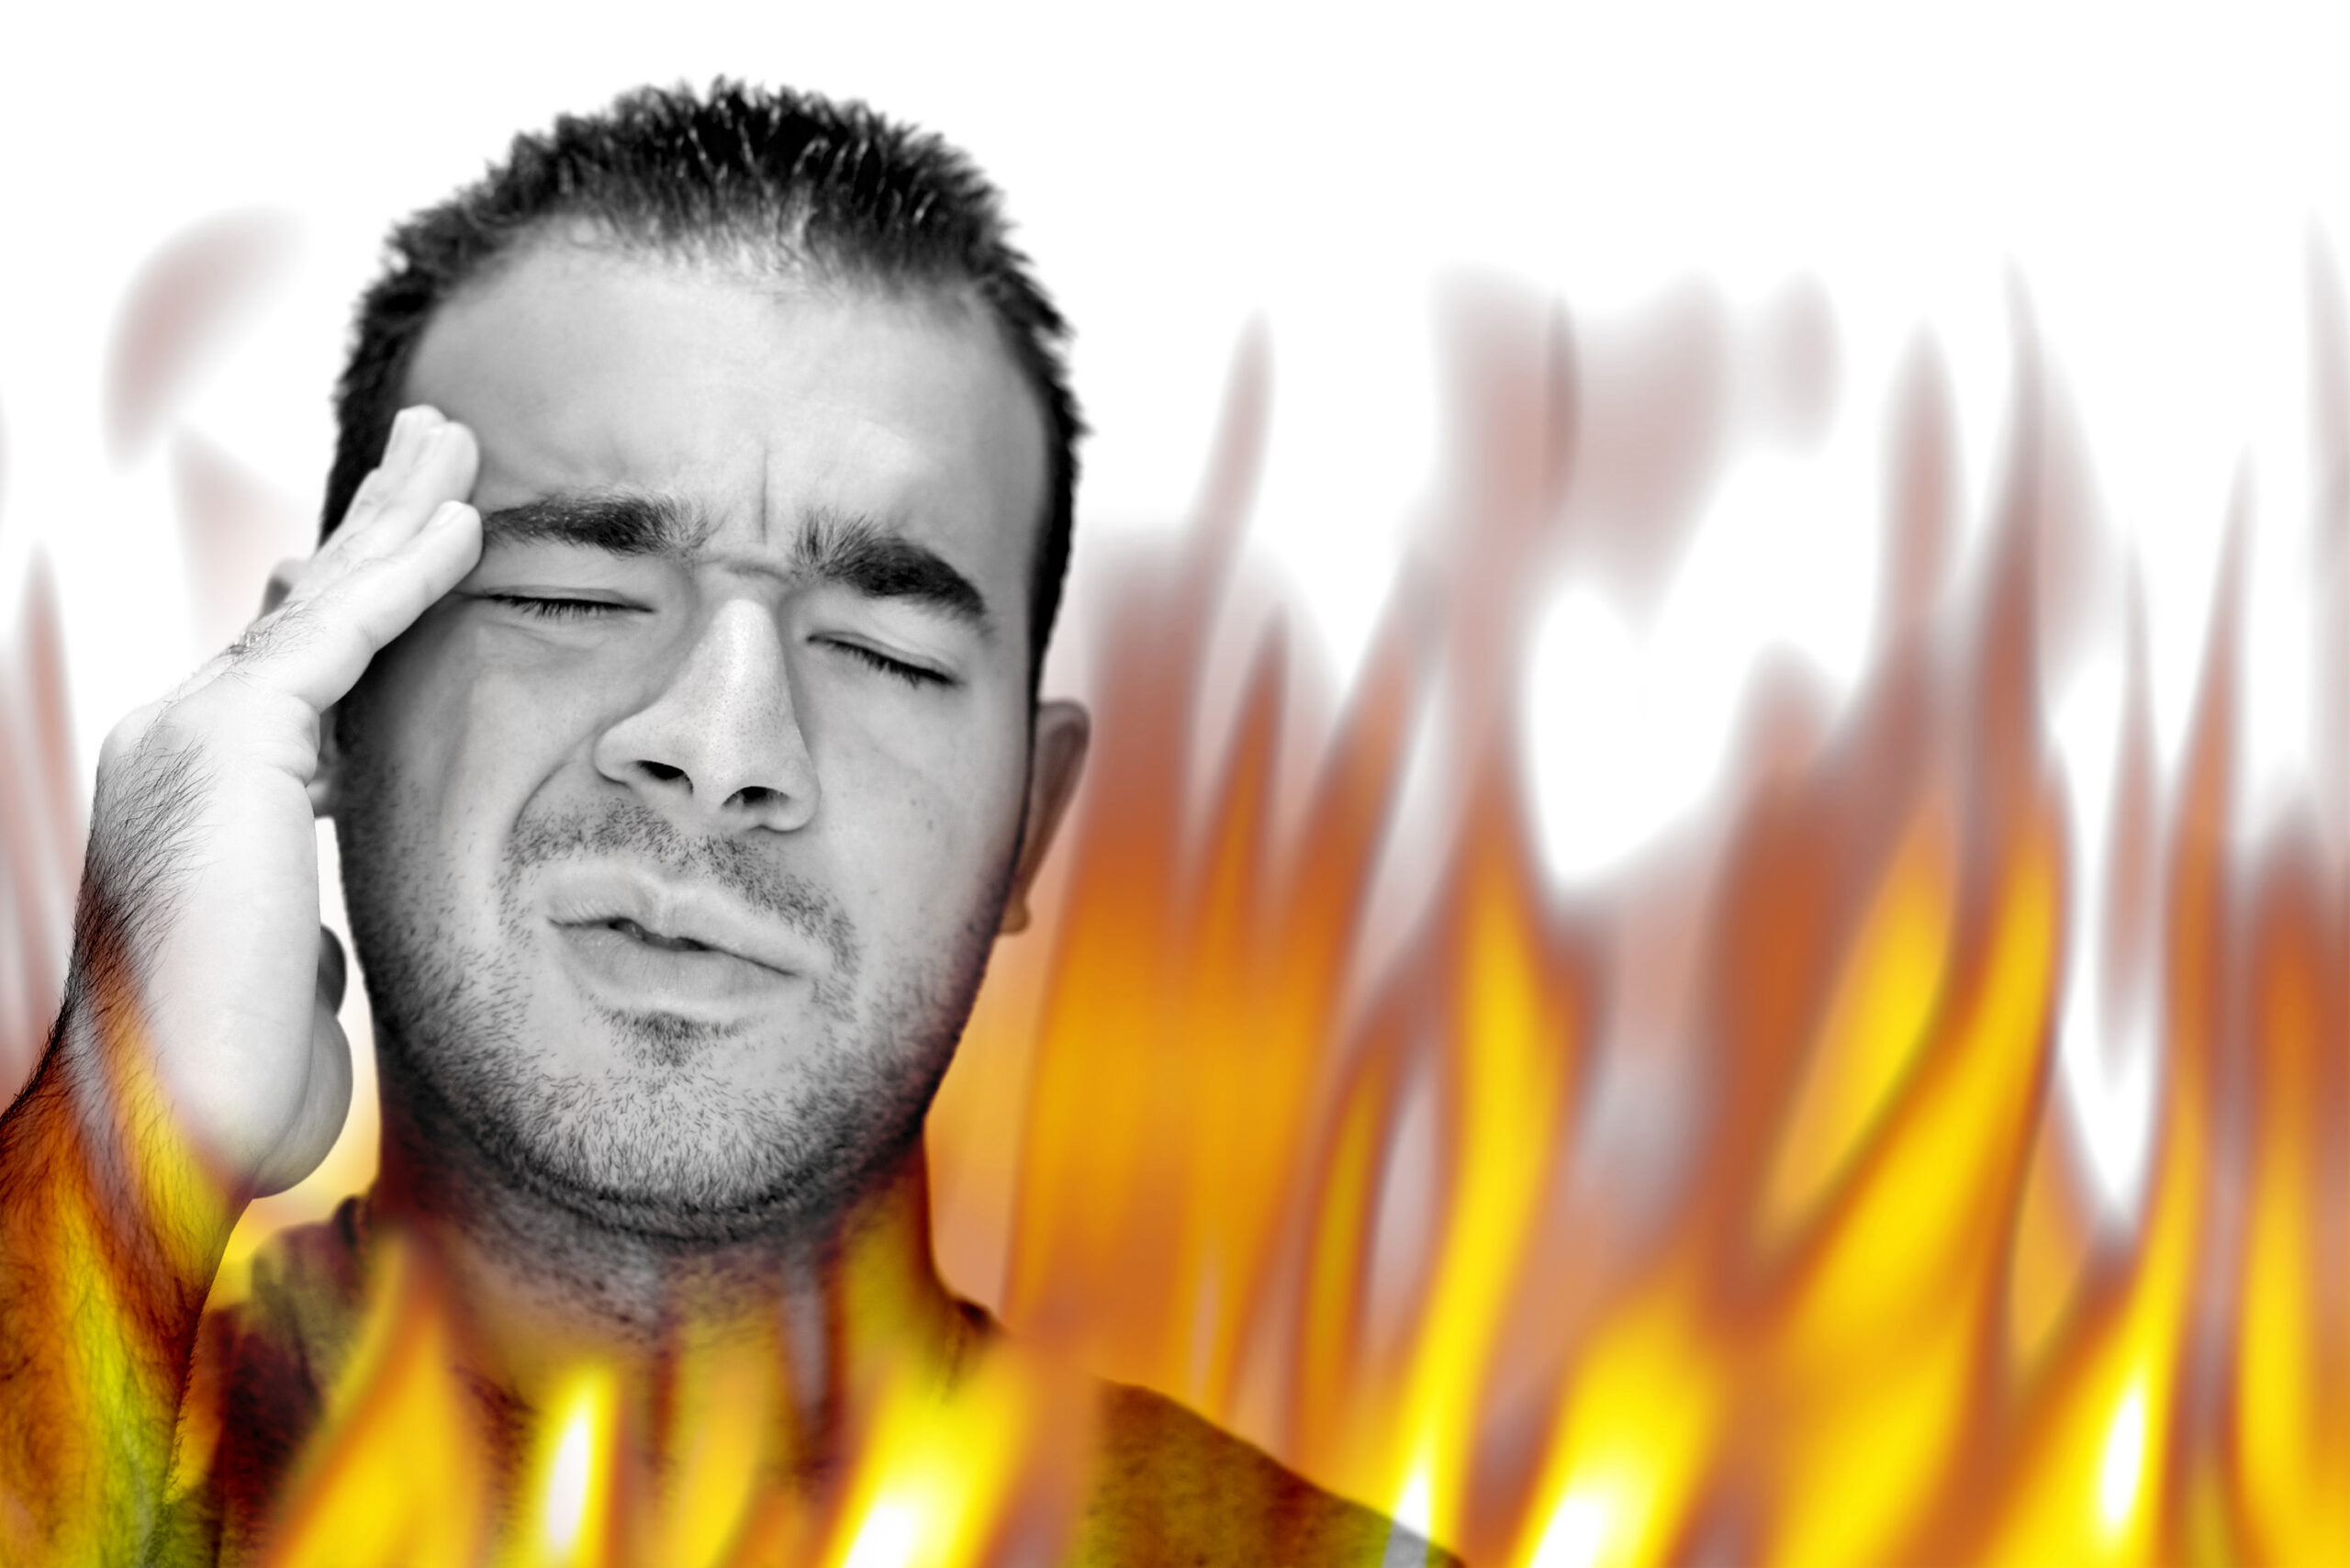 a man experiencing pain and suffering with hot fiery flames burning around him Htq z9RHi scaled